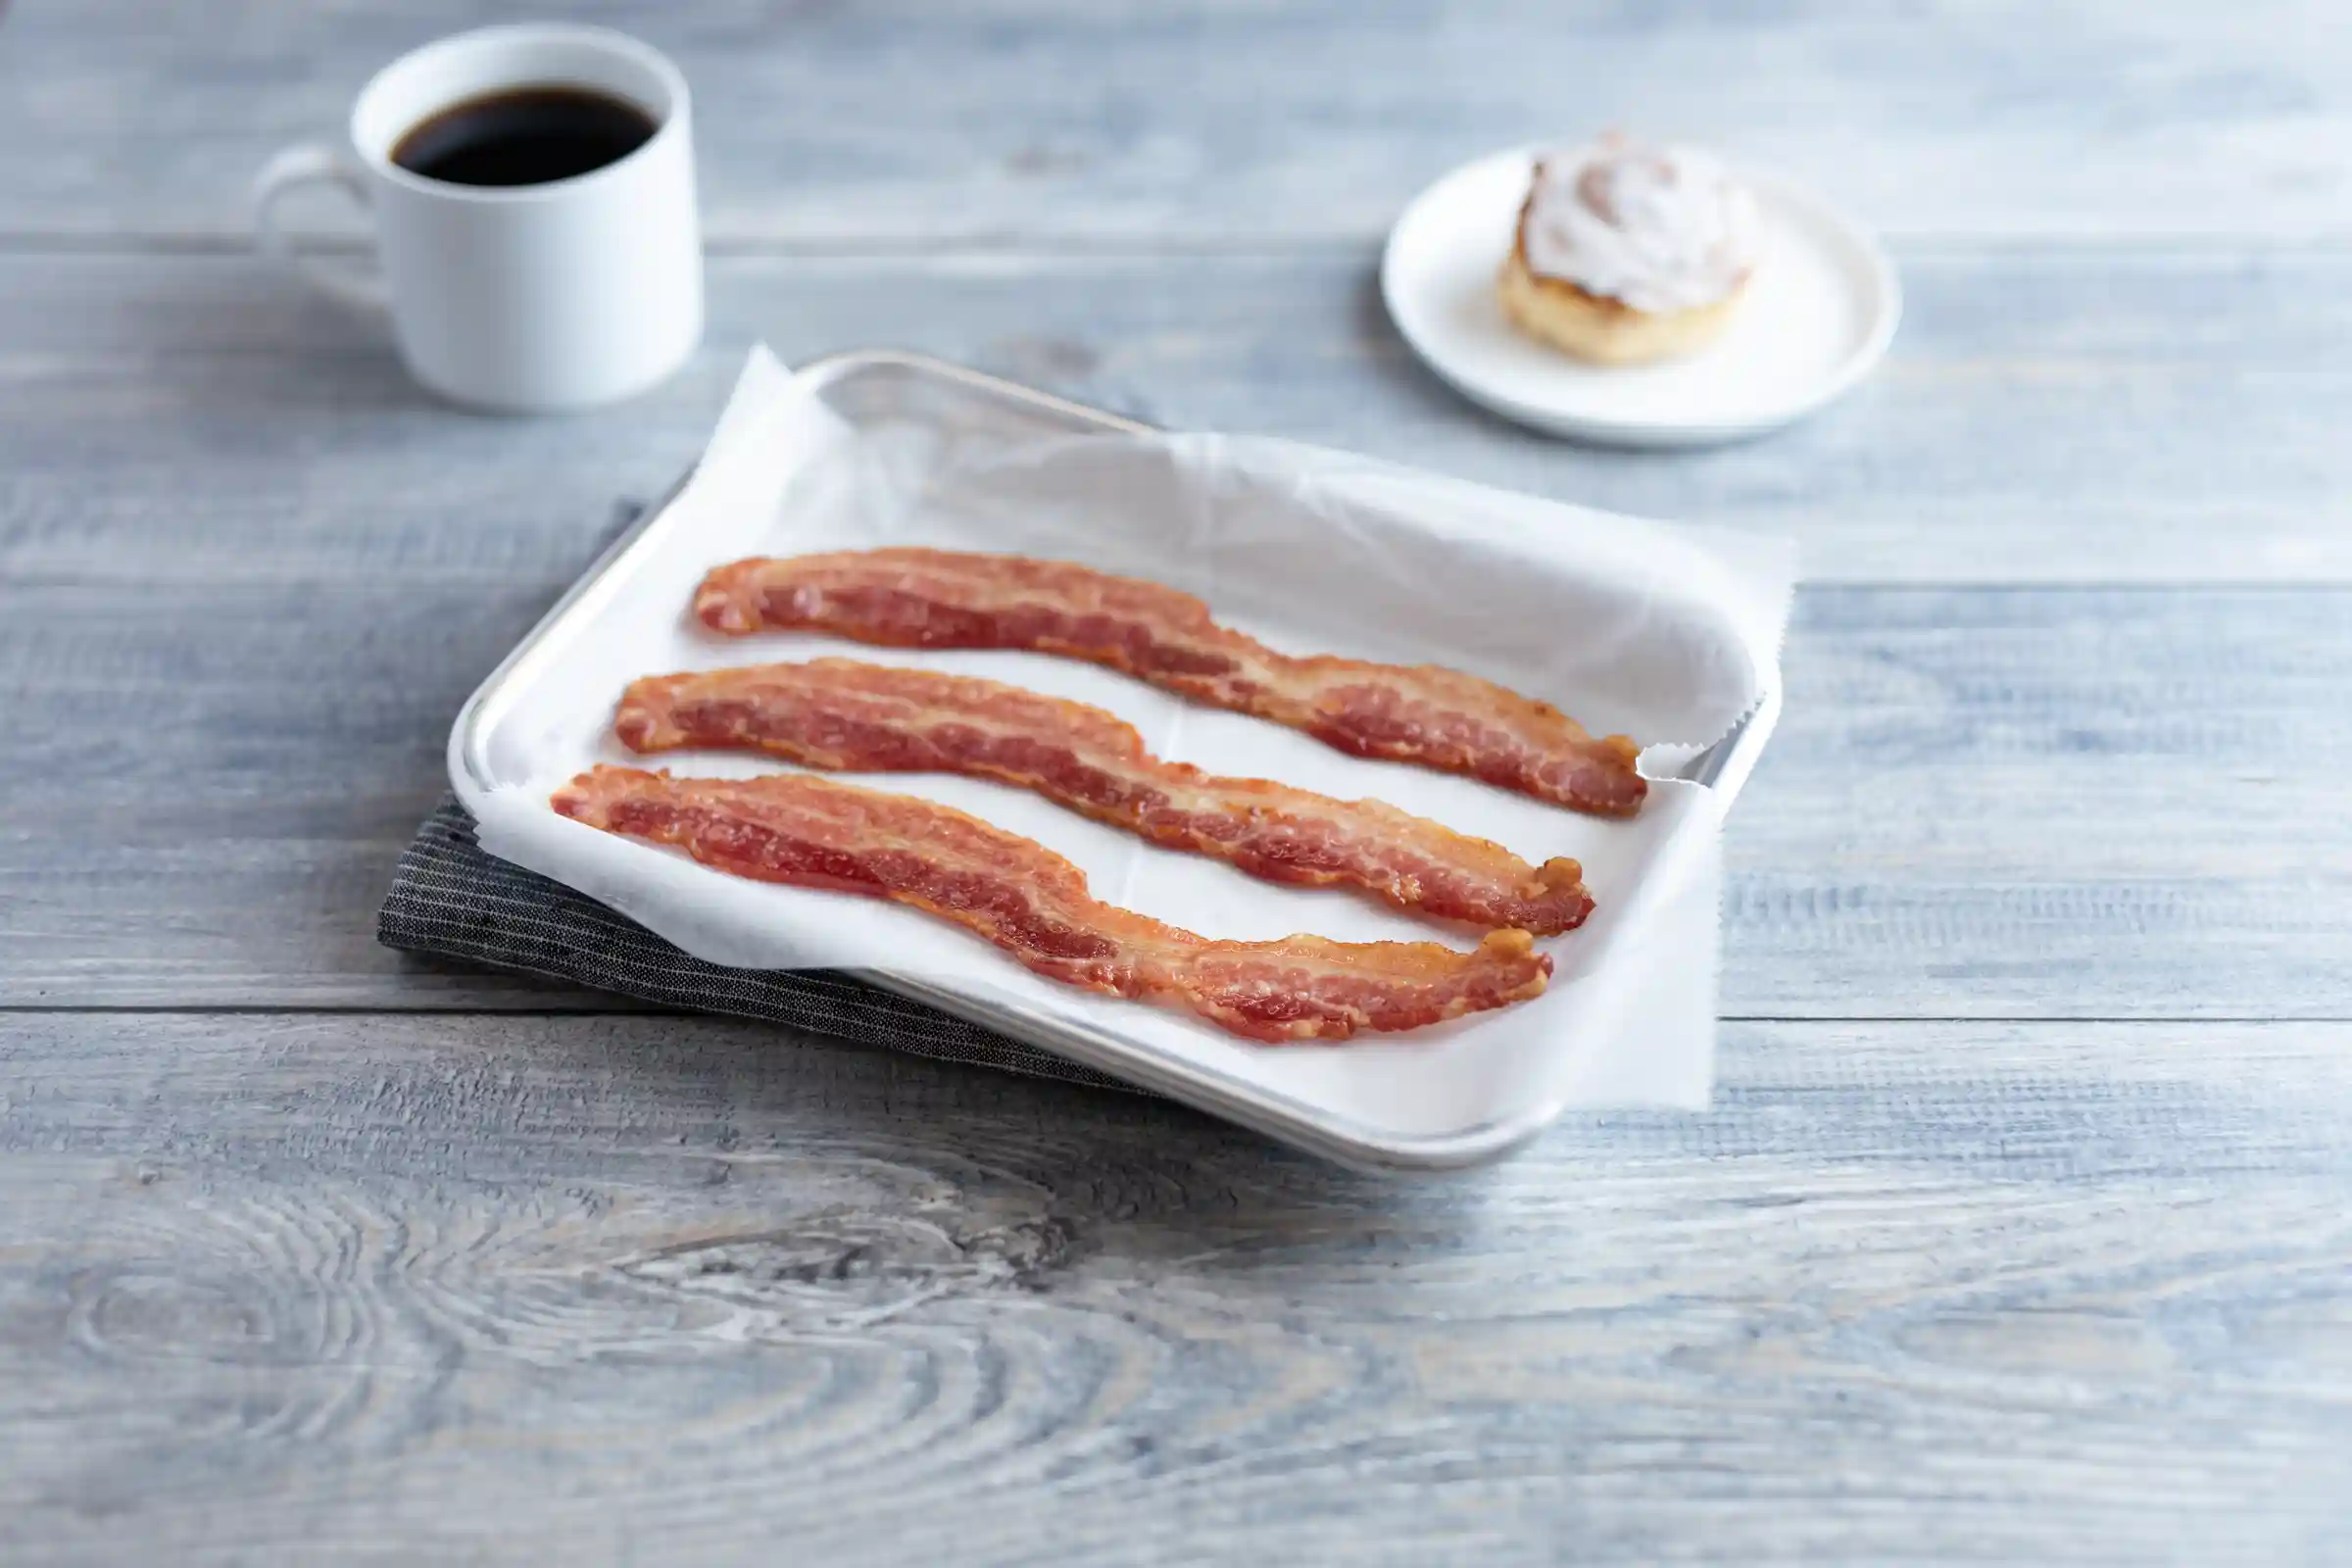 Wright® Brand Naturally Hickory Smoked Regular Sliced Bacon, Bulk, 30 Lbs, 14-18 Slices per Pound, Frozen_image_11